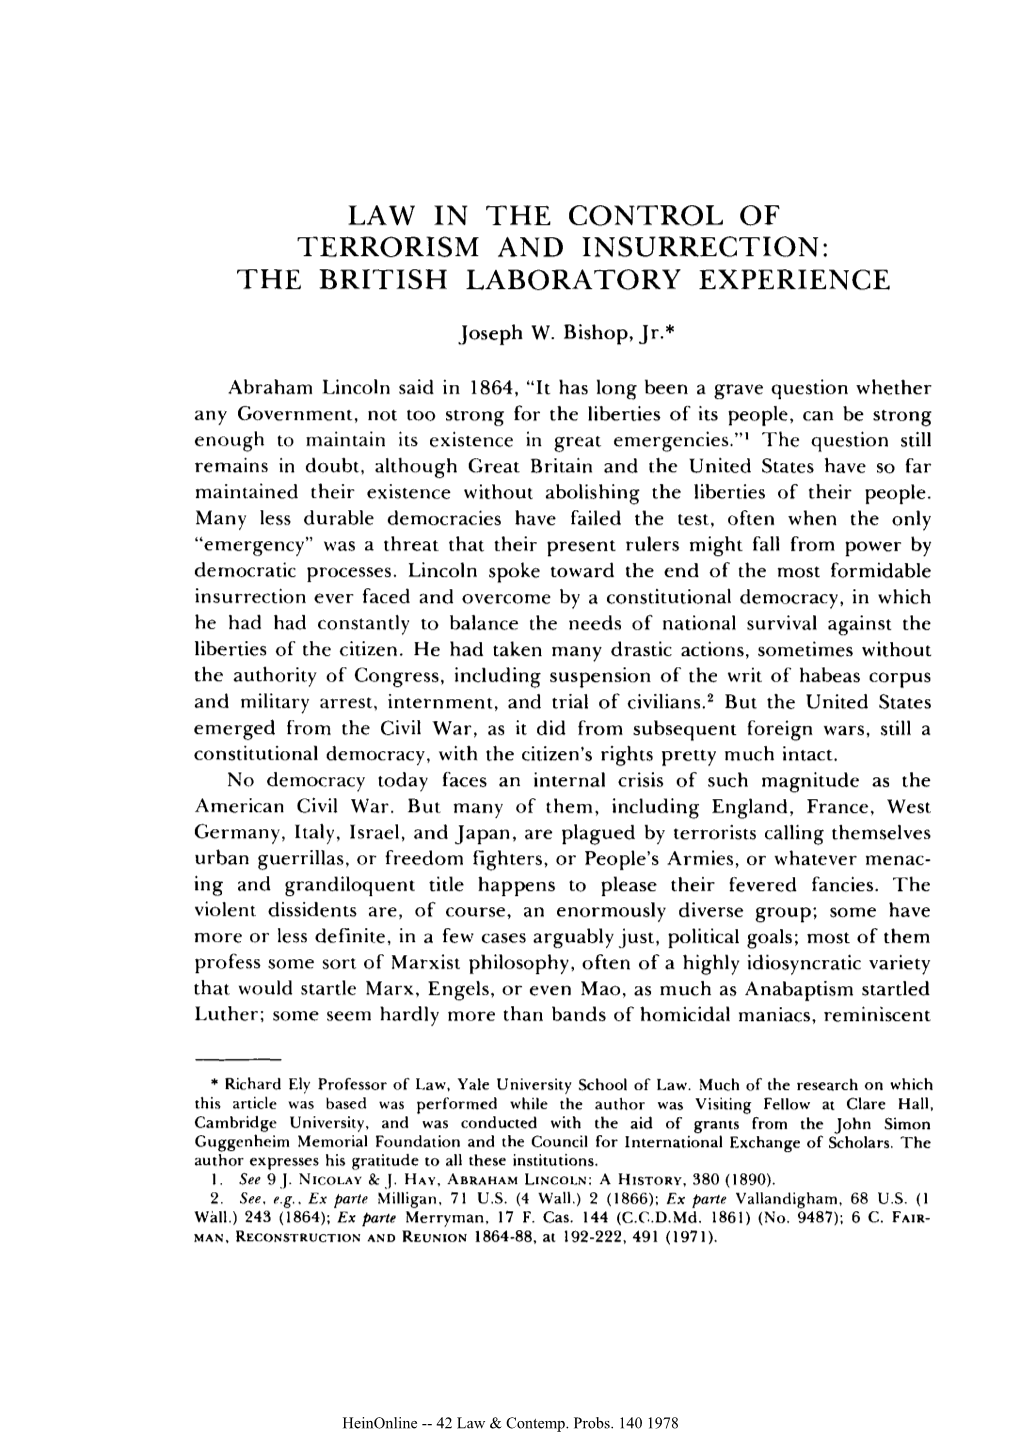 Law in the Control of Terrorism and Insurrection: the British Laboratory Experience